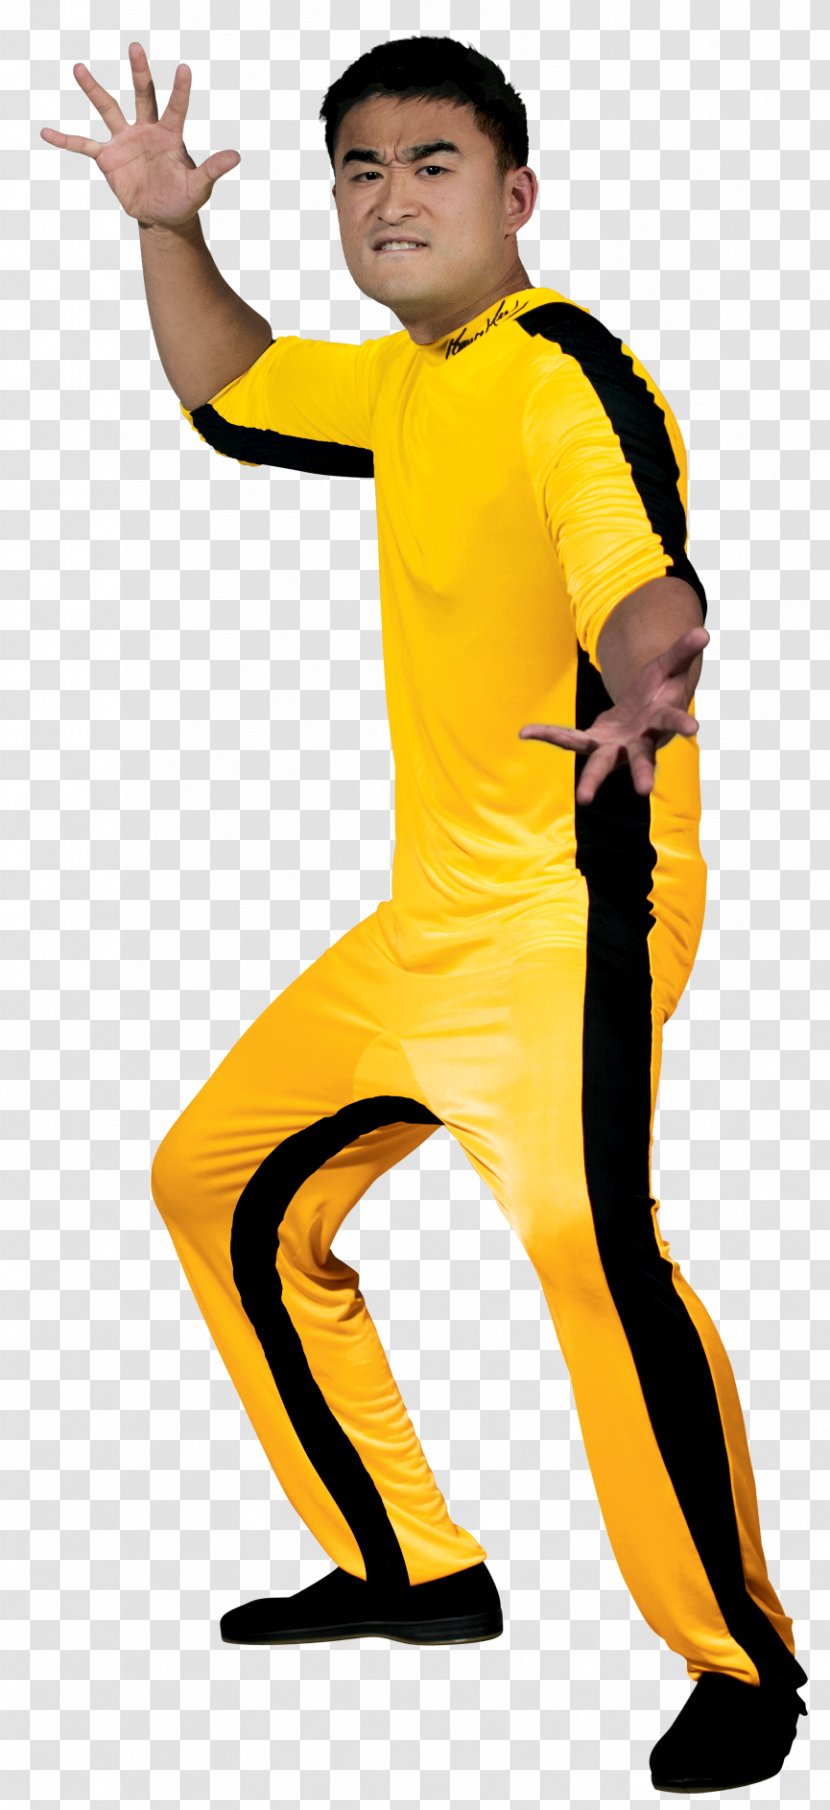 Bruce Lee The Game Of Death Costume Jumpsuit Martial Arts - Zipper - Yellow Dancer Transparent PNG